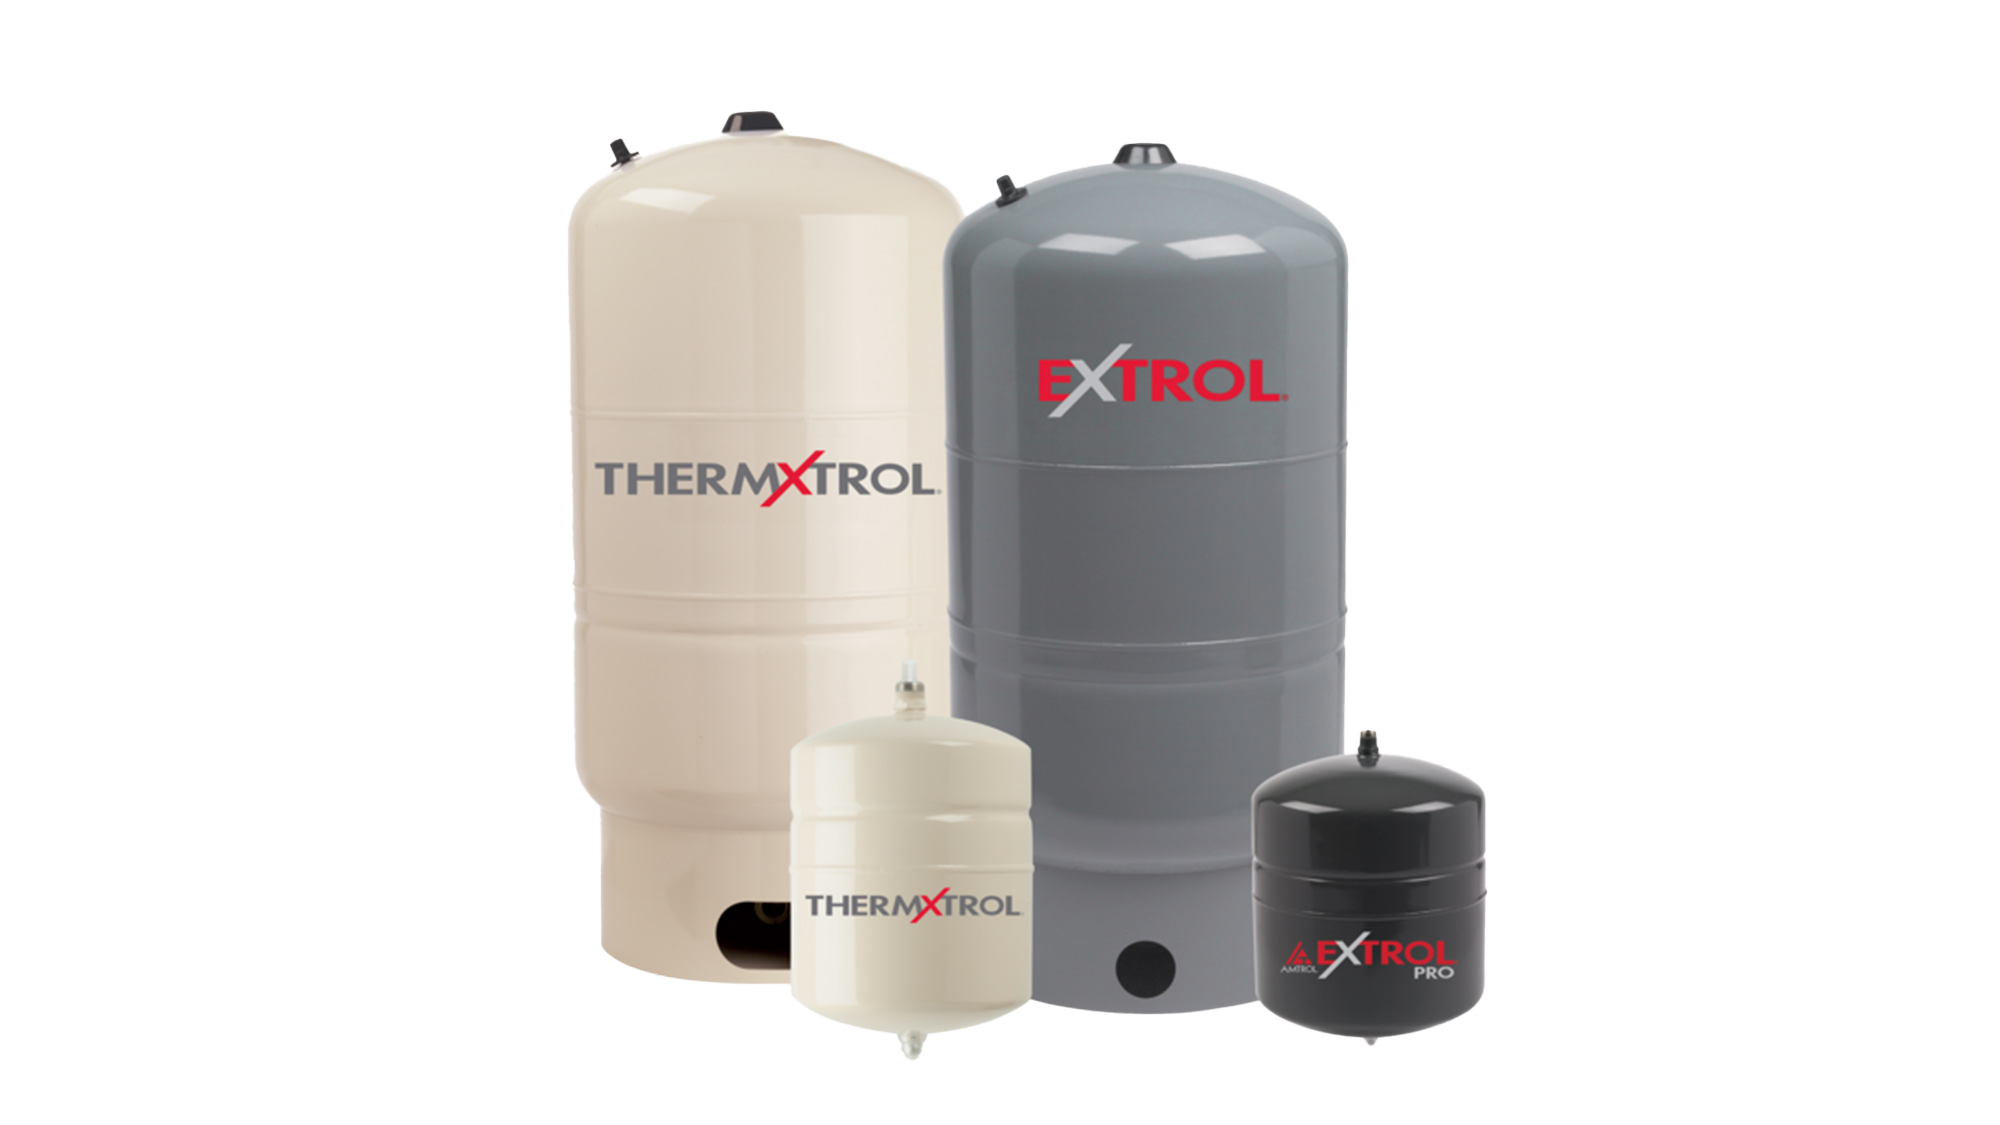 Grouping of ThermXtrol and EXtrol Canisters